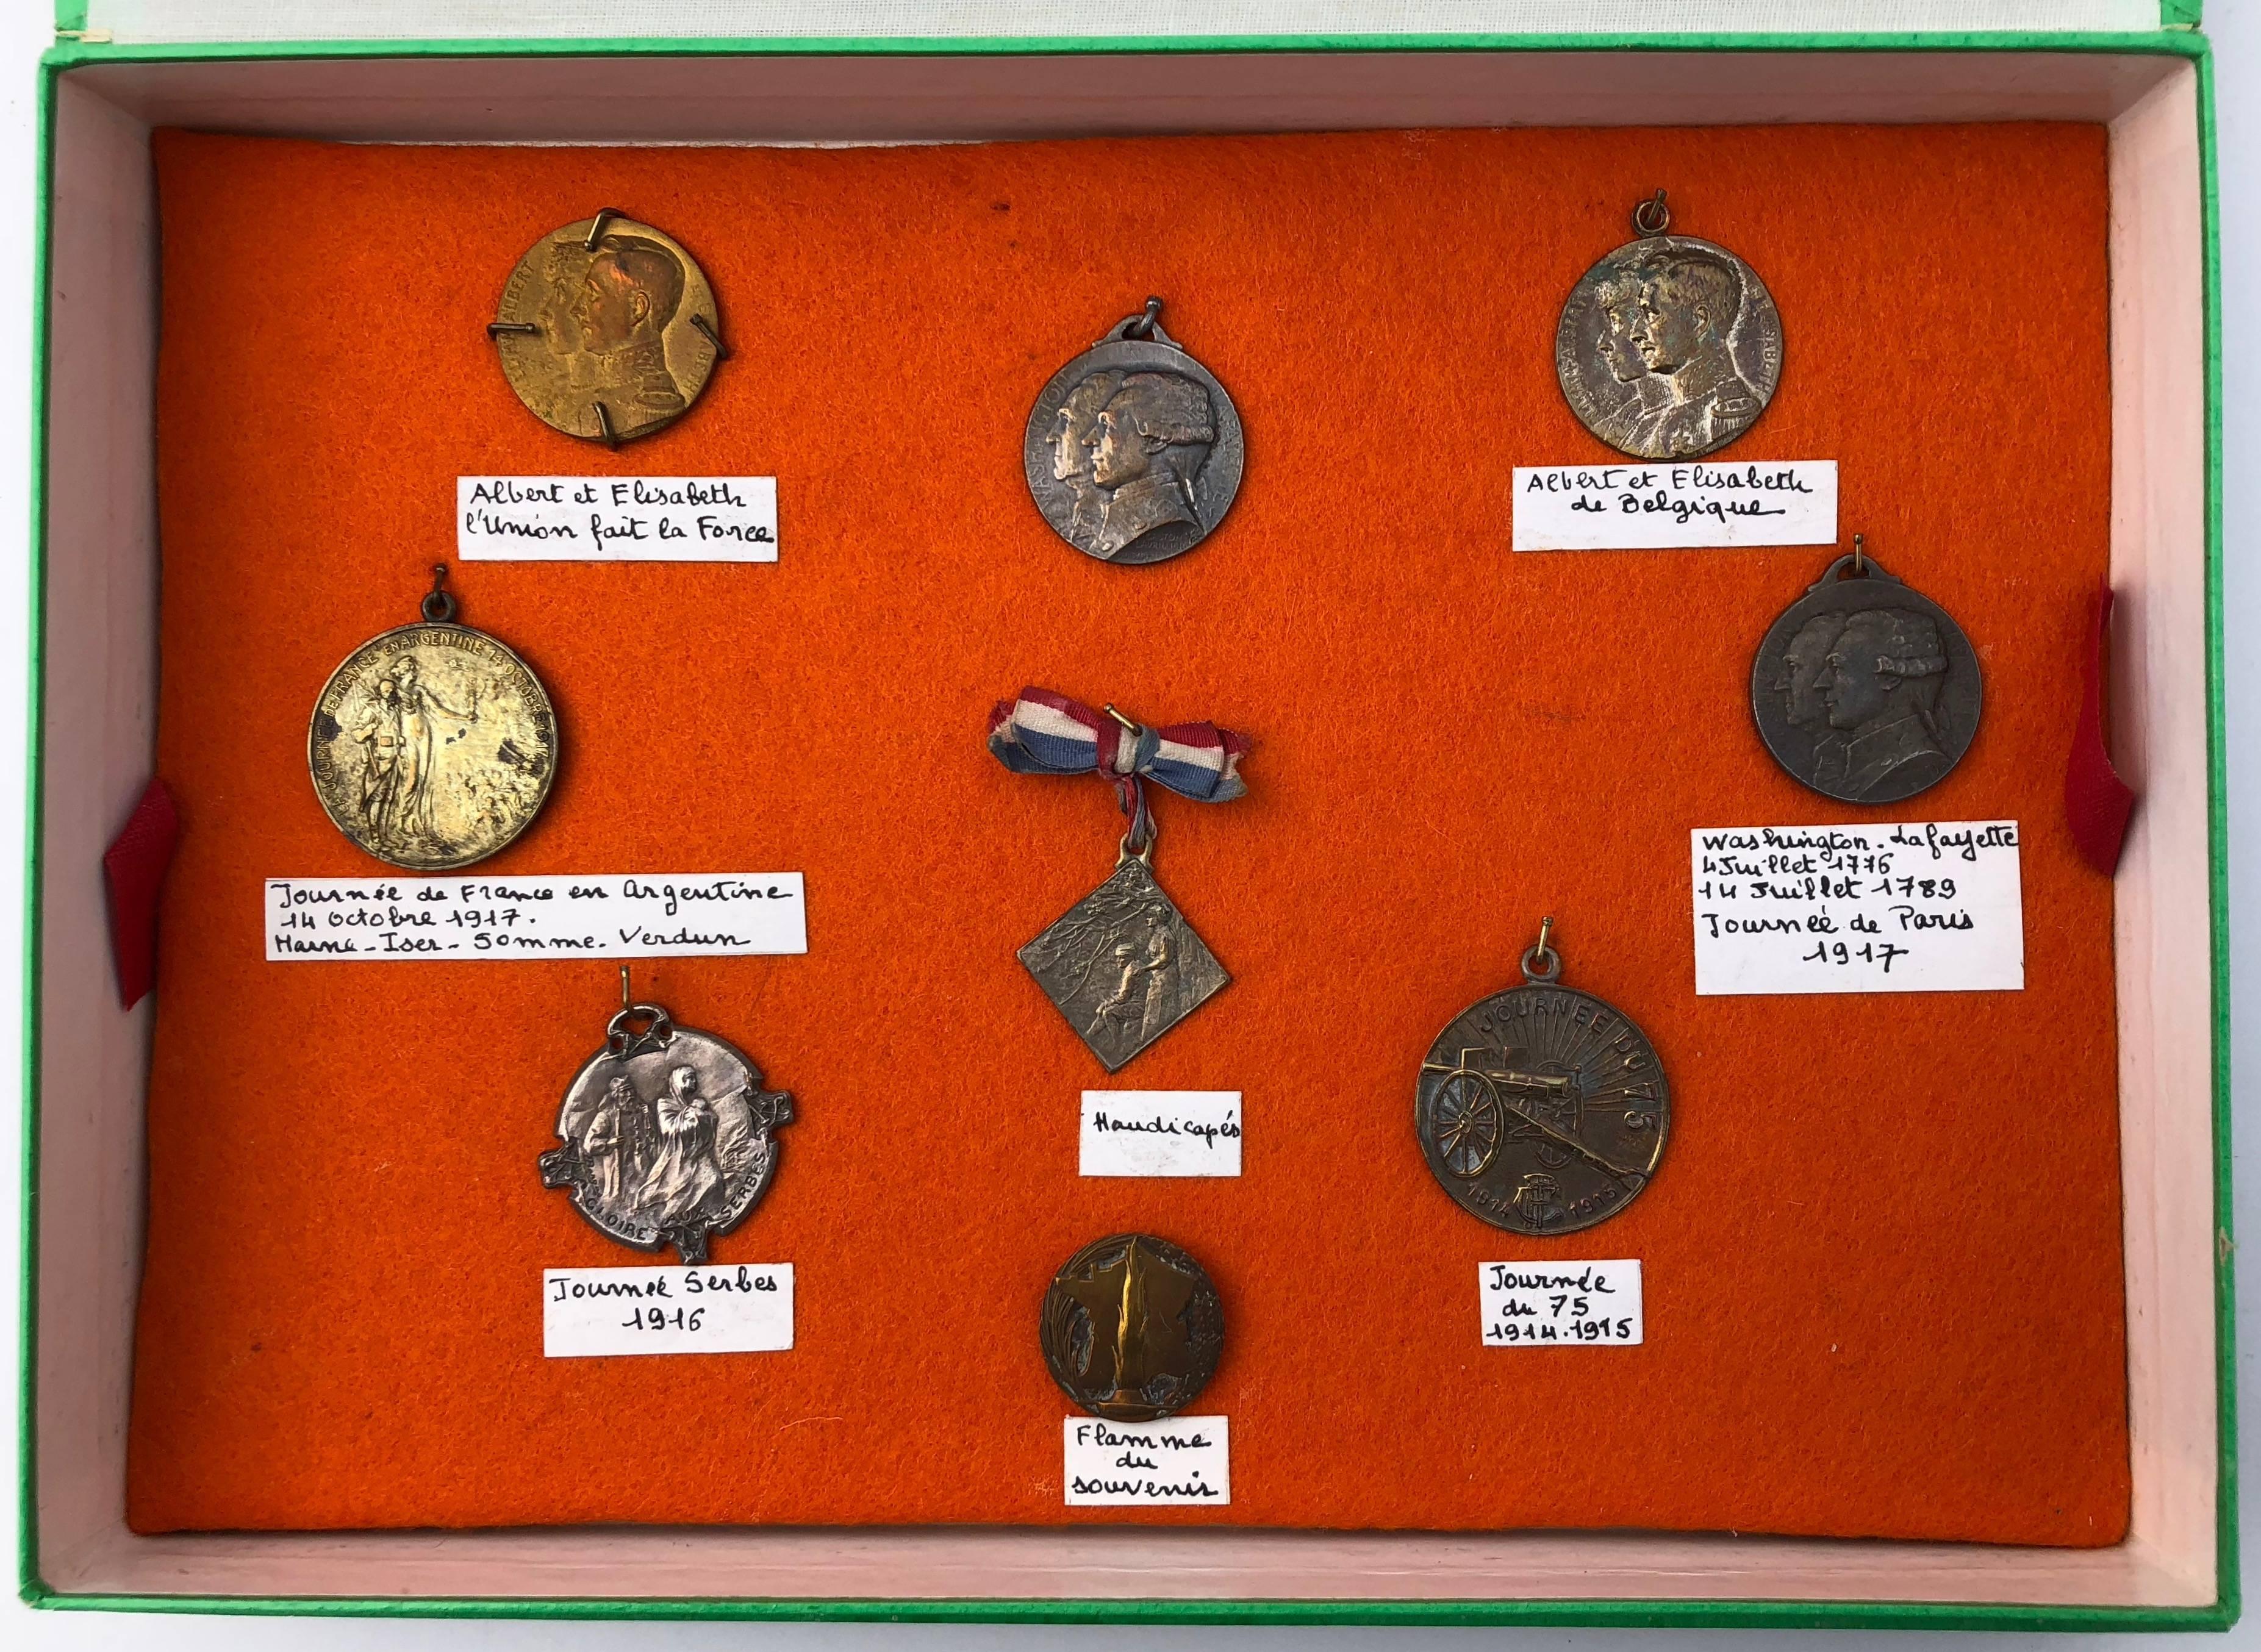 This is a unique set of first world war medals from both France and Belgium. The set of nine medals are in a display box with an orange background interior, black box exterior with green trim, interior lift taps and marked with the dates 1914-1918